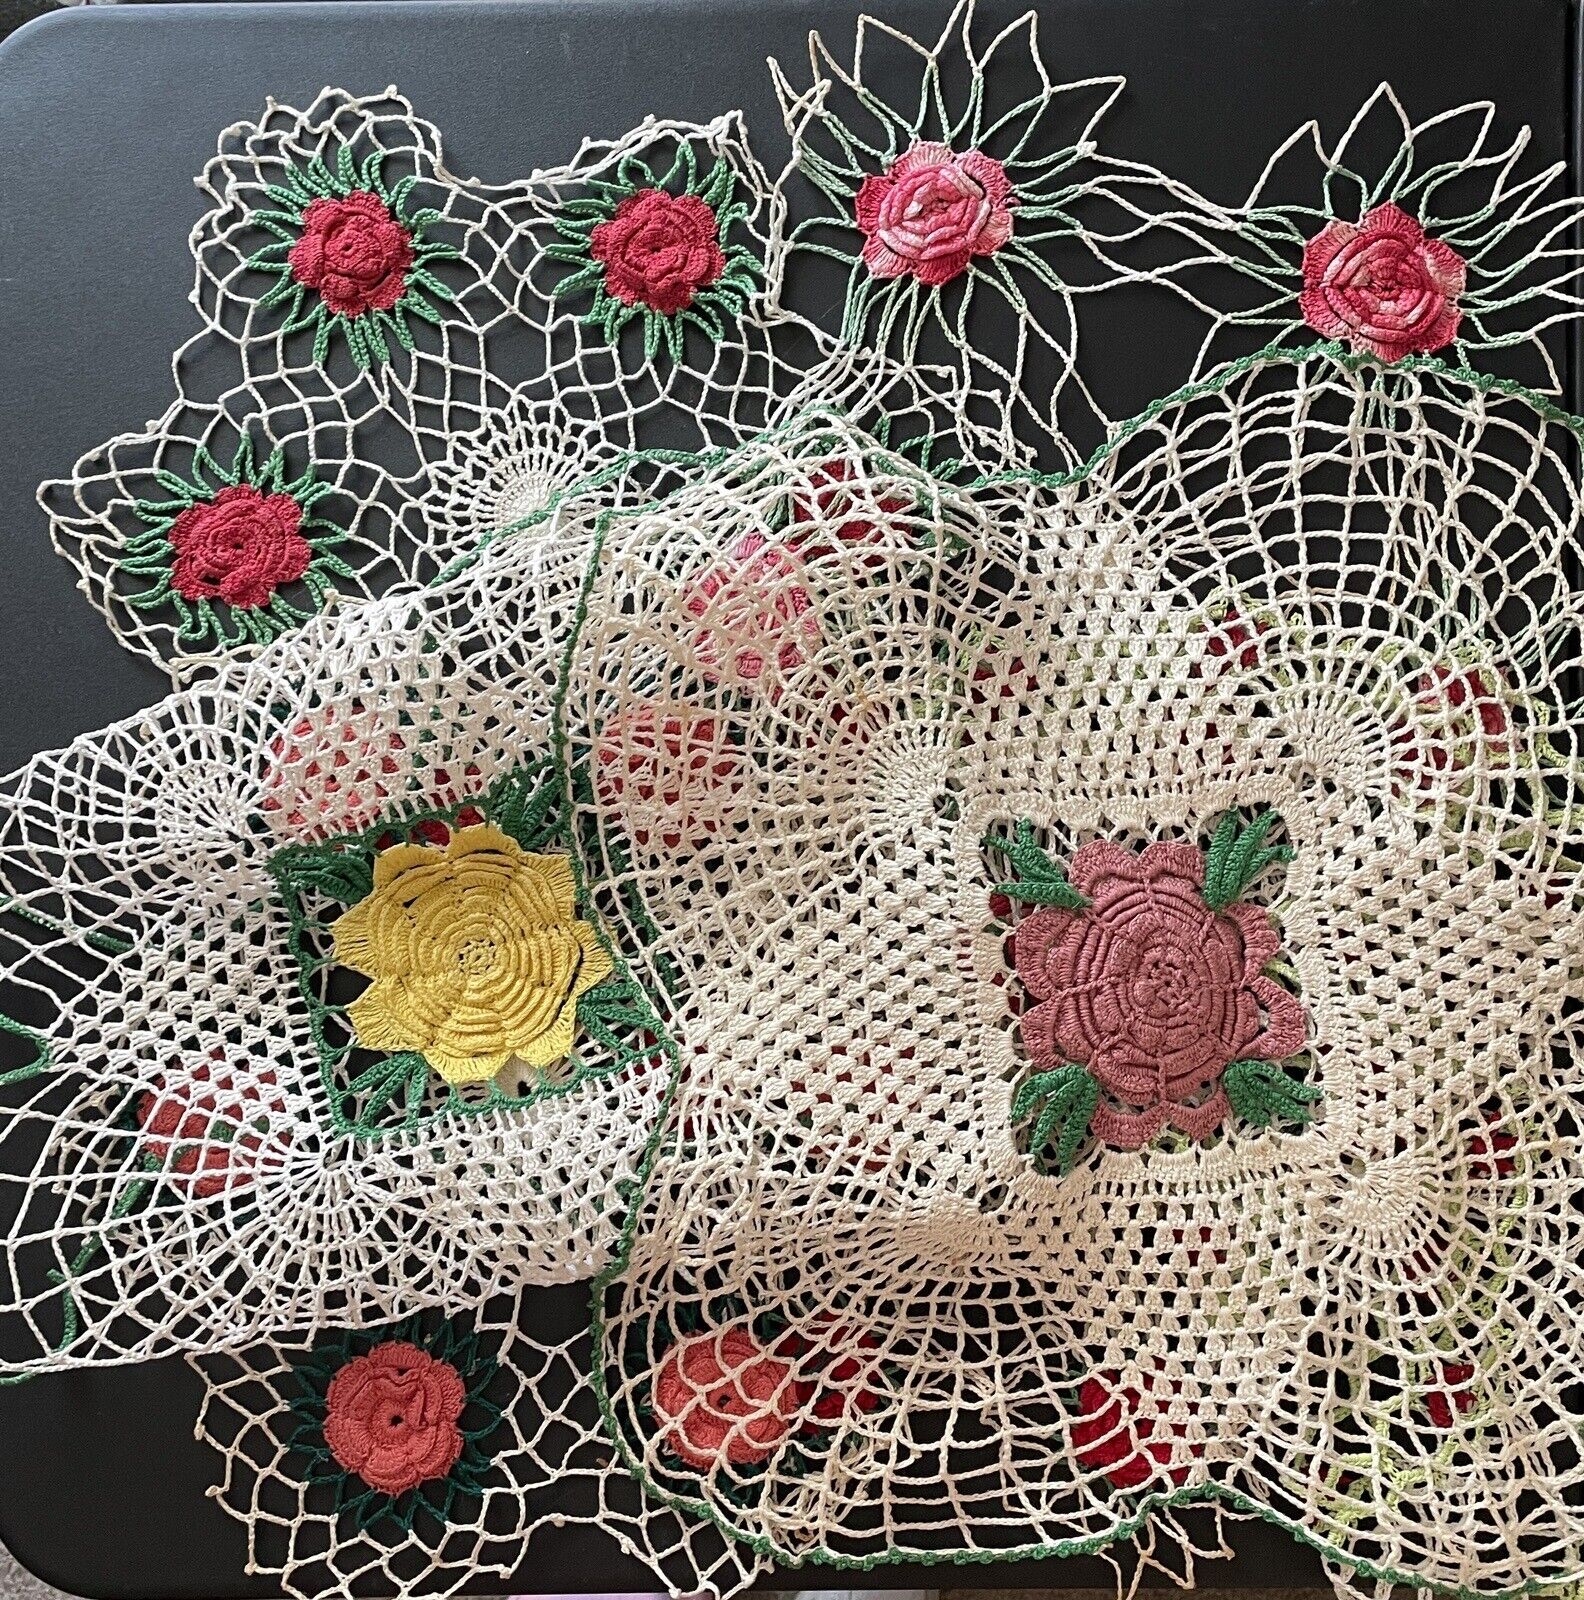 Lot of 7 Large Vintage Handmade Crocheted Doily Doilies 3D Starched 14”-19”